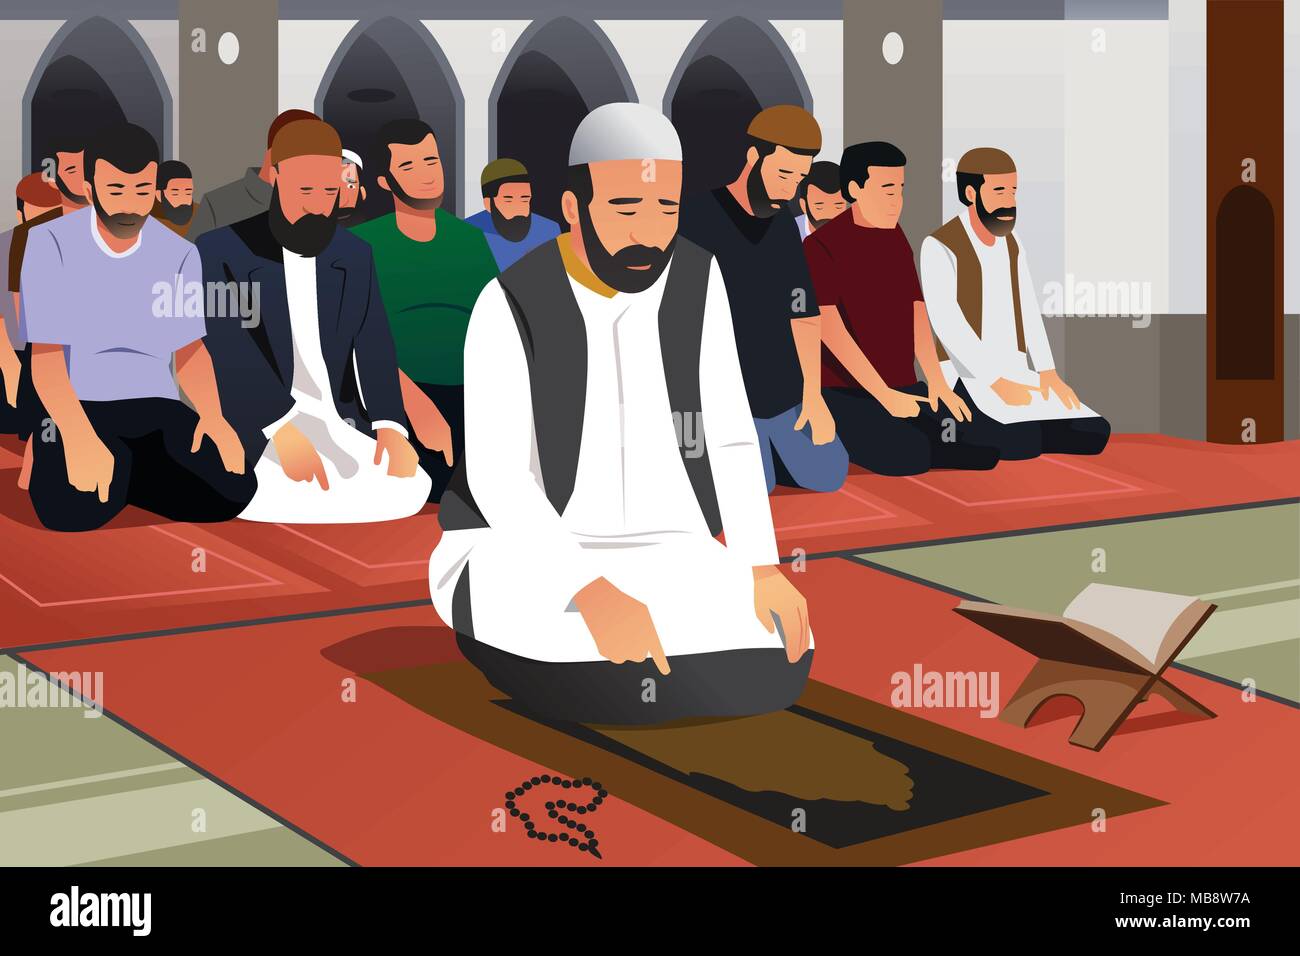 A vector illustration of Muslims Praying in a Mosque Stock Vector